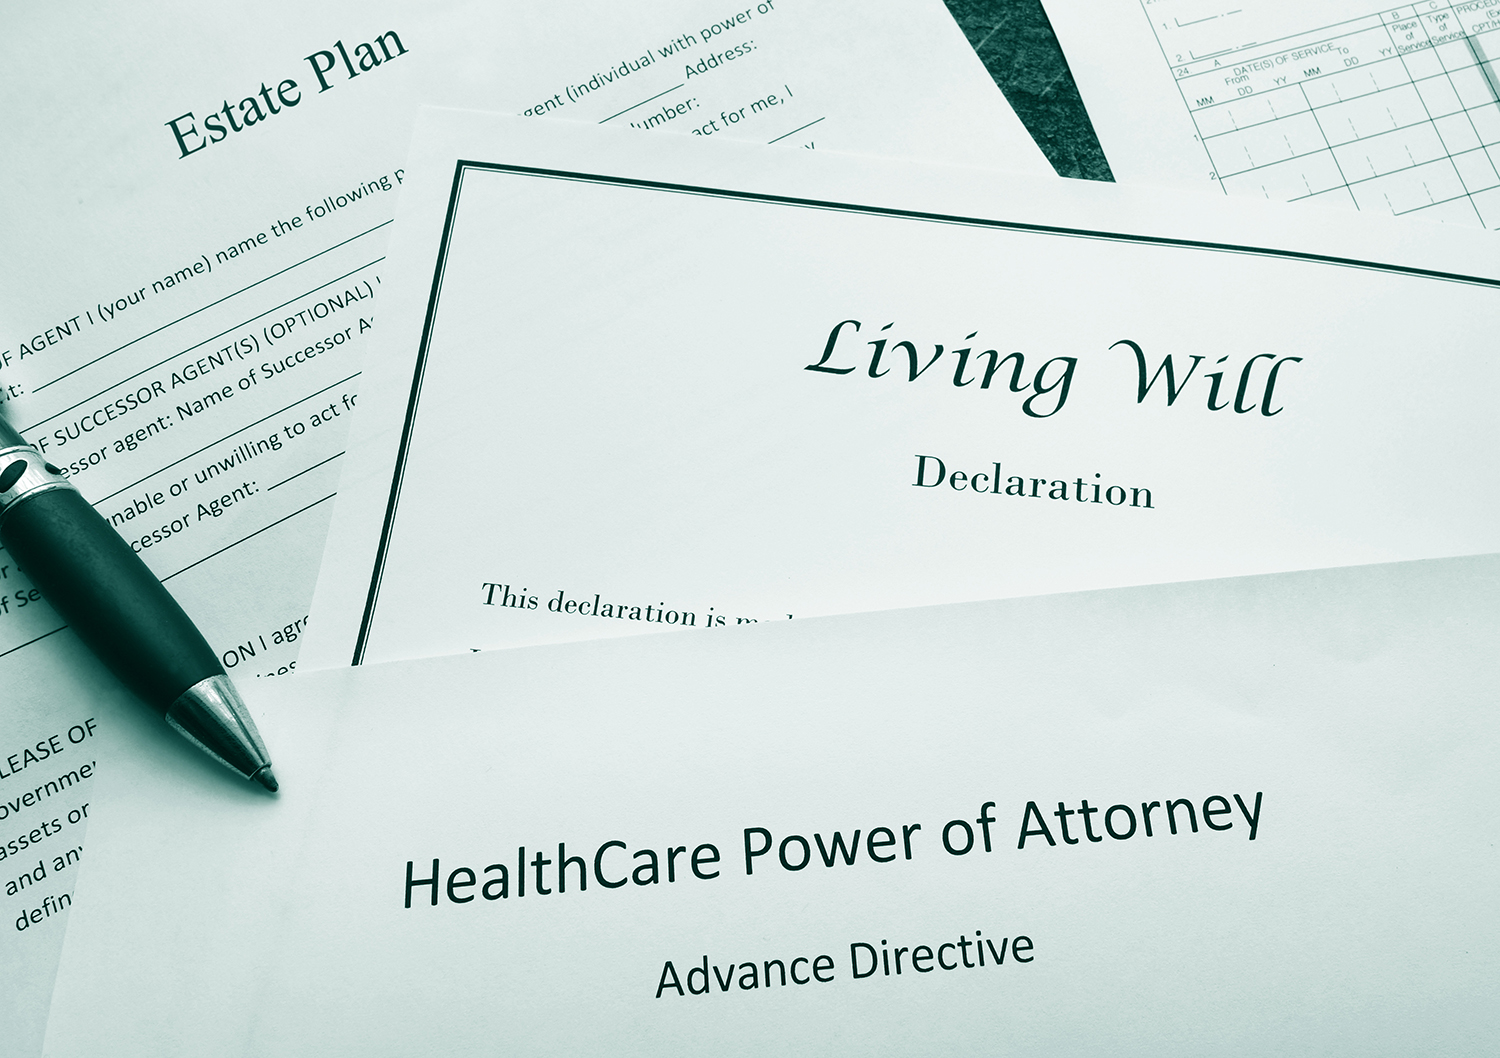 death of a loved one - estate plan and will